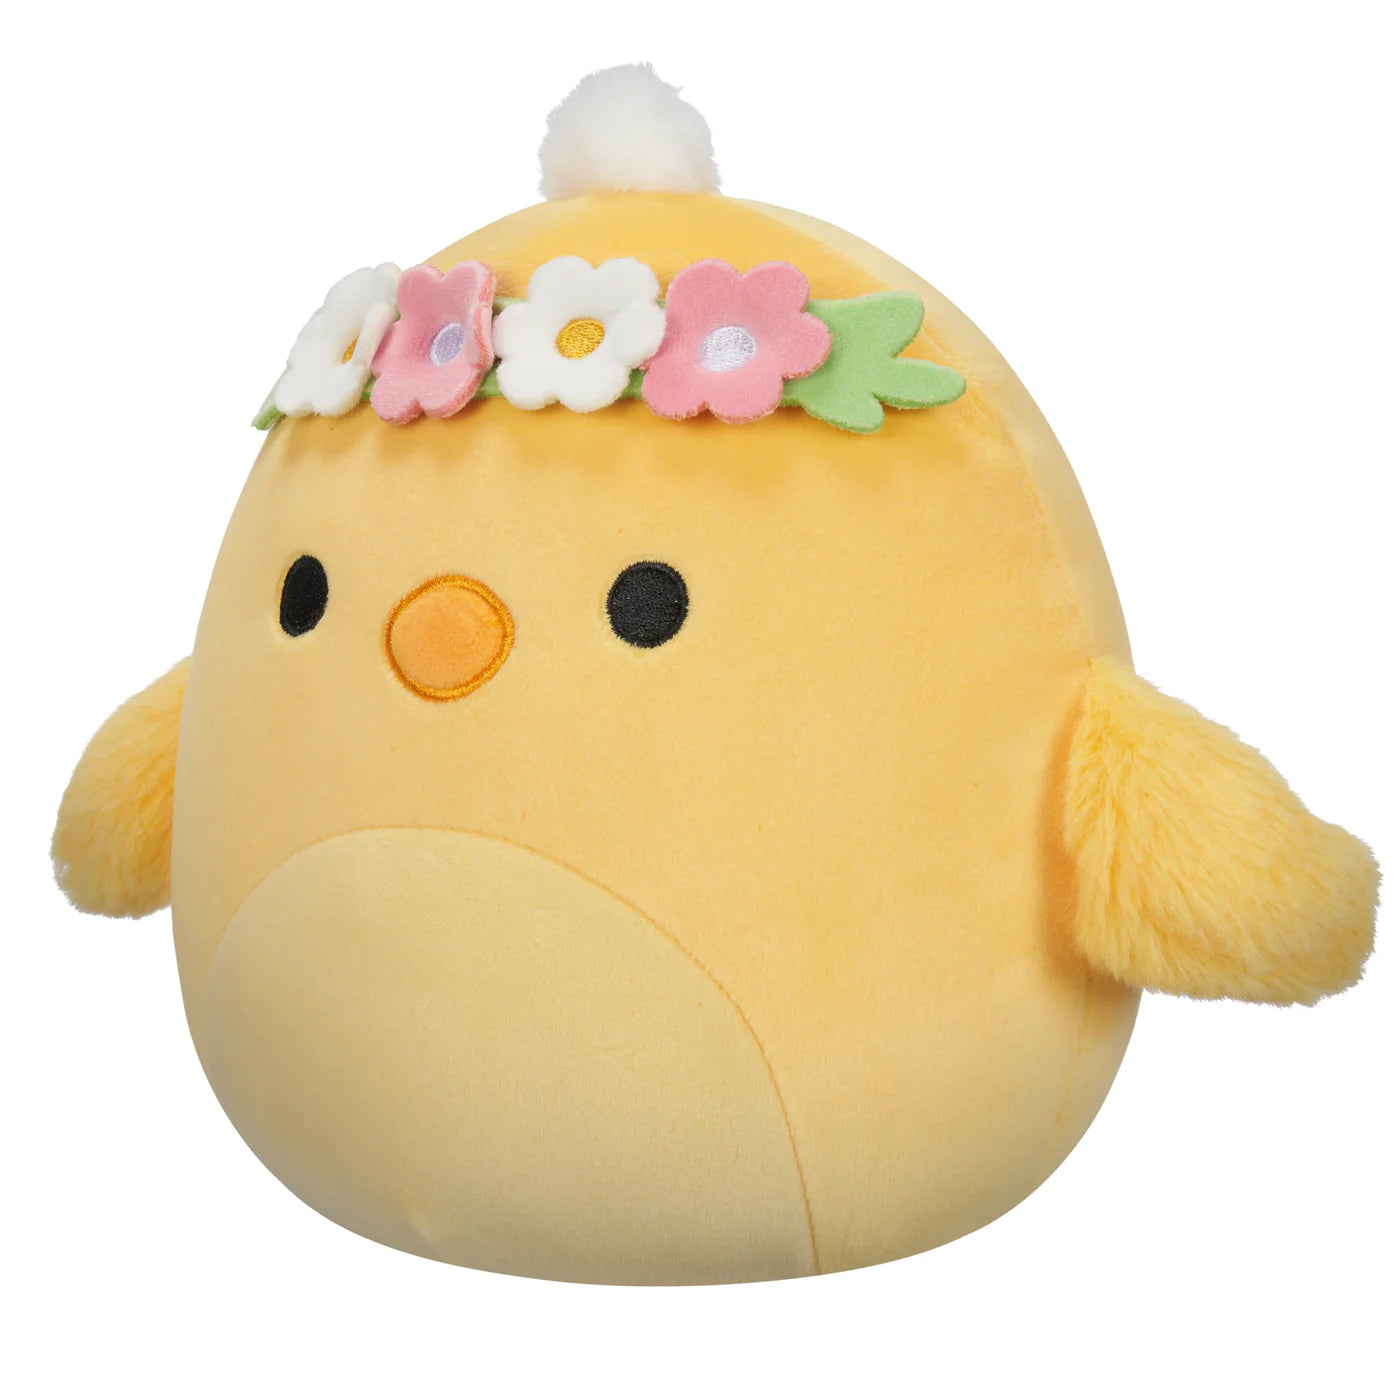 Squishmallows Easter 7.5" Triston The Yellow Chick